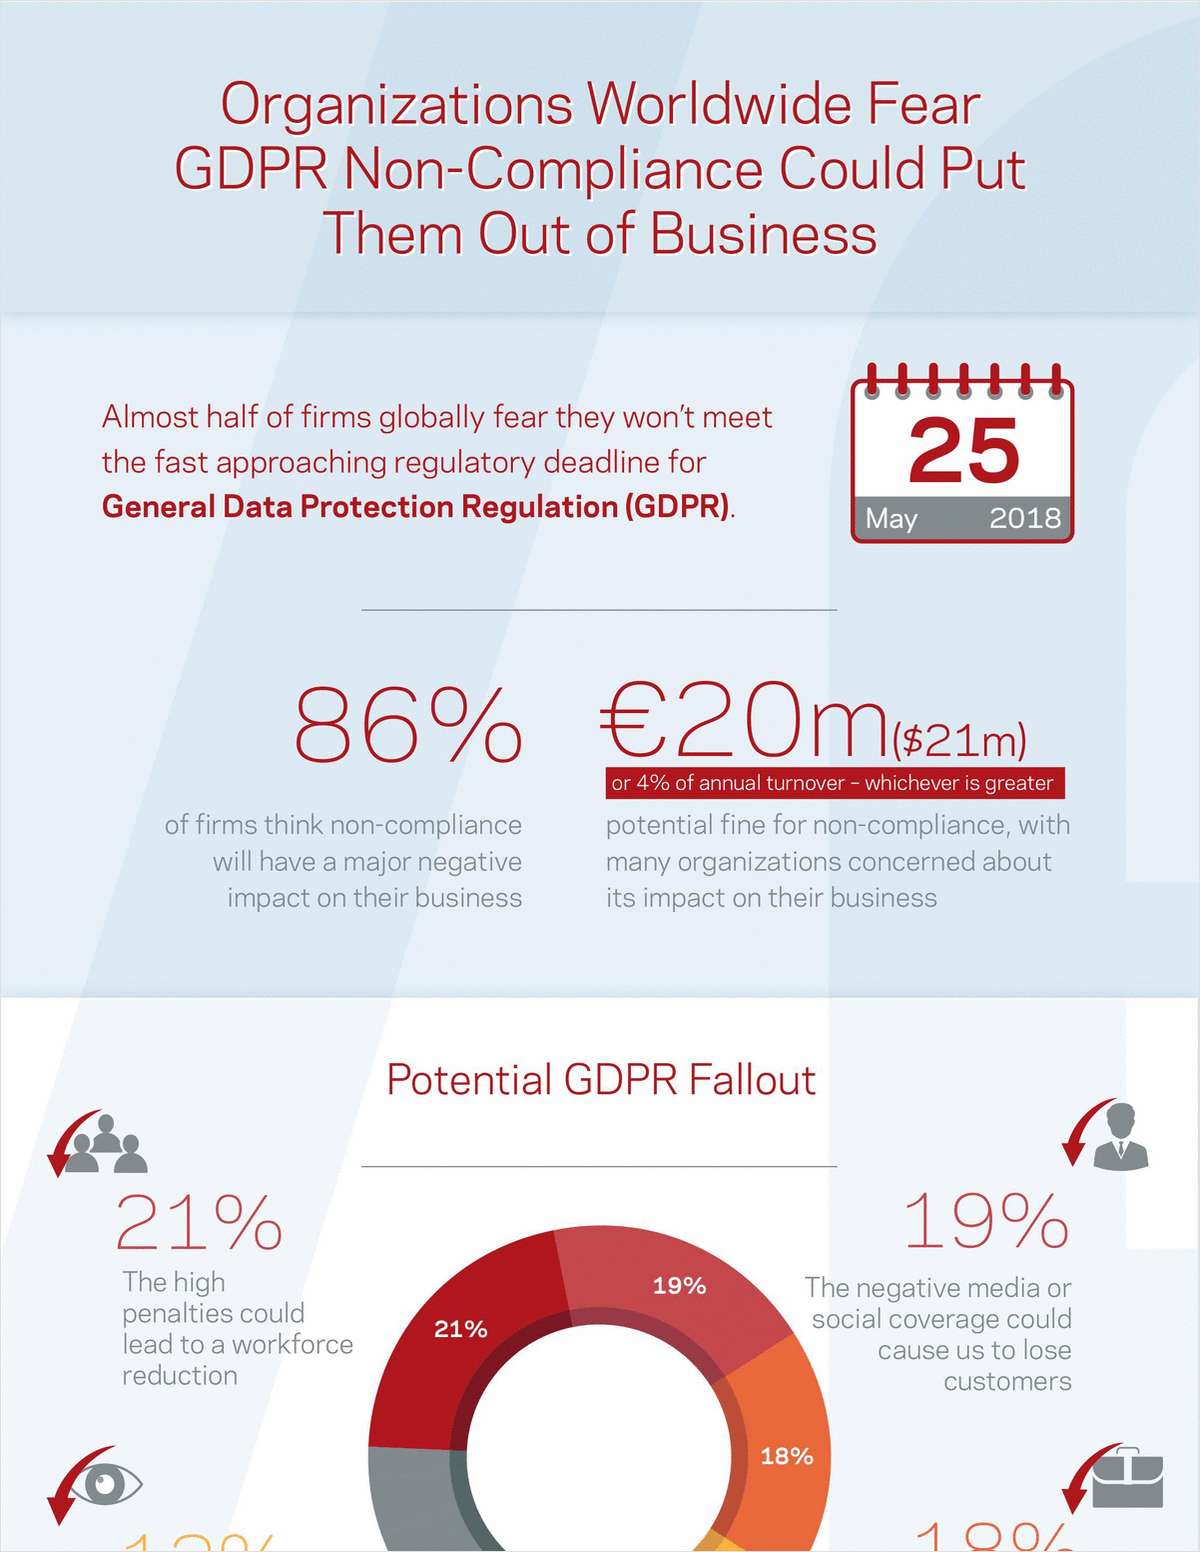 Organizations Worldwide Fear GDPR Non-Compliance Could Put Them Out of Business